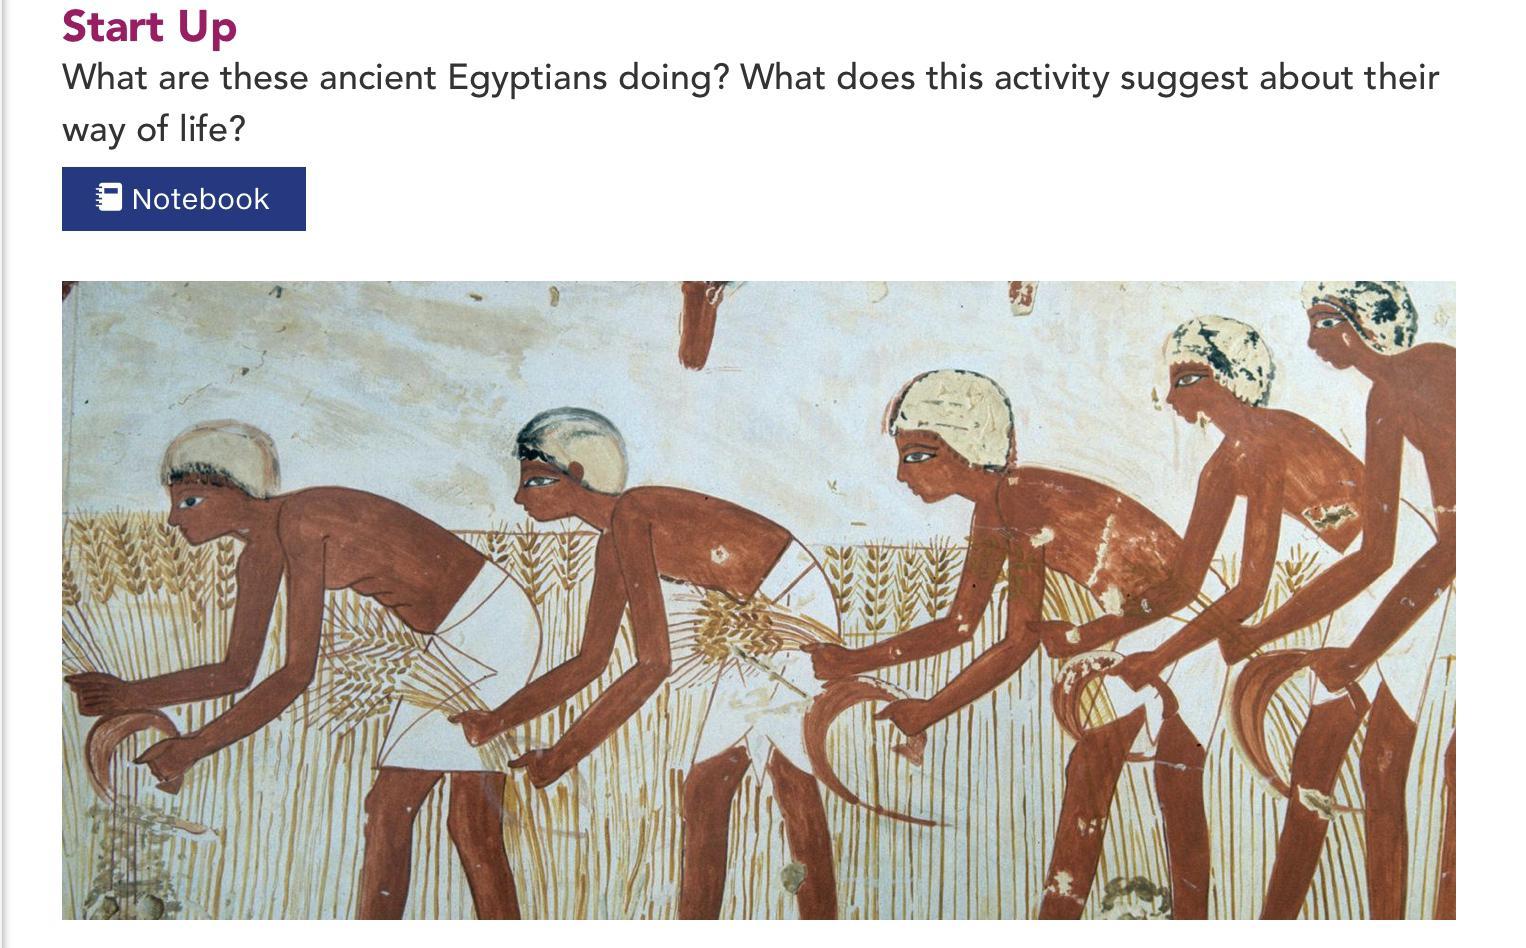 What Are These Ancient Egyptians Doing? What Does This Activity Suggest About Theirway Of Life?